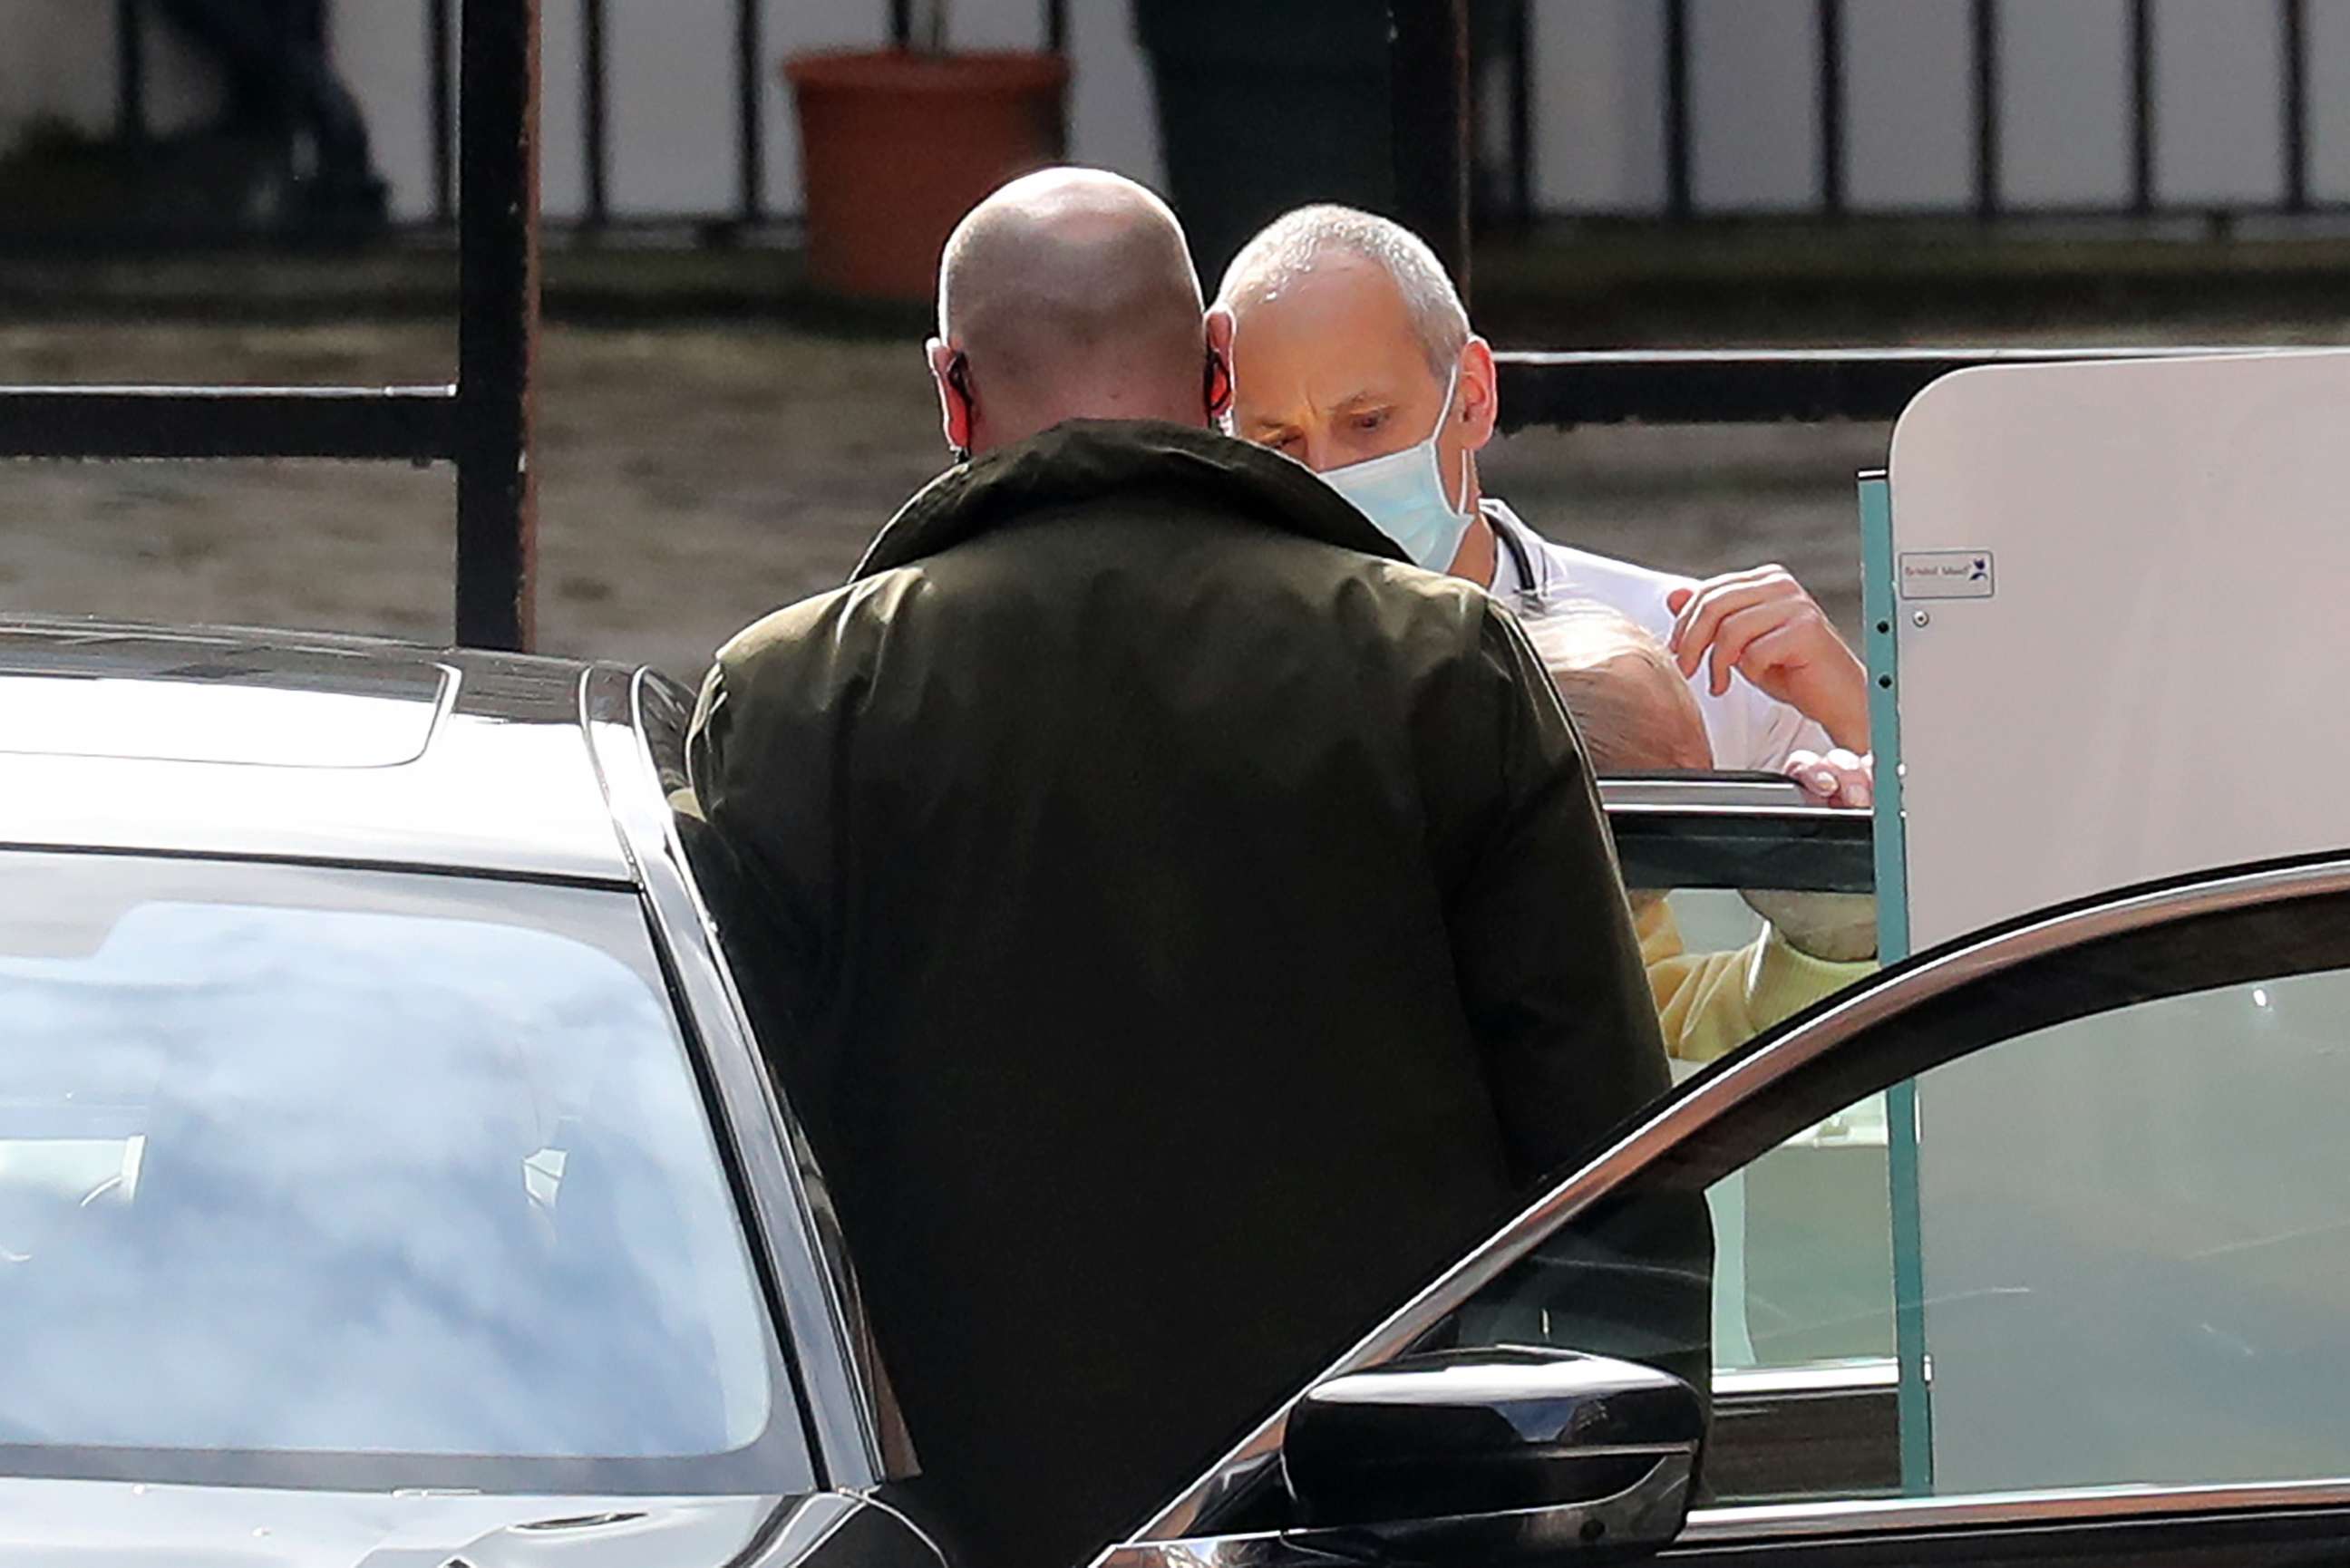 PHOTO: Prince Philip, Duke of Edinburgh obscured gets into a car as he is seen leaving King Edward VII Hospital on March 16, 2021 in London.